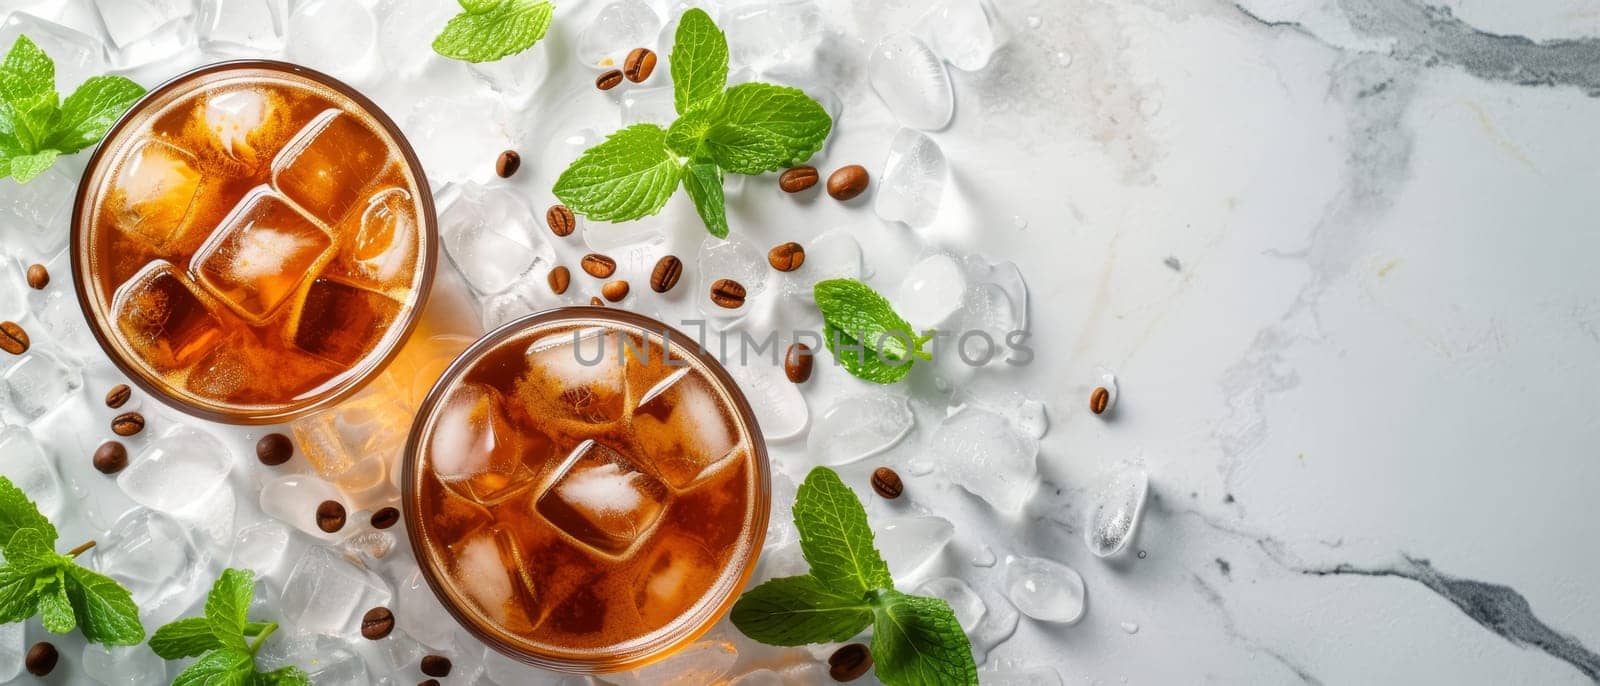 Cold black coffee with ice cubes and mint leaves on a white background. Cold brew - summer drinks. by sfinks